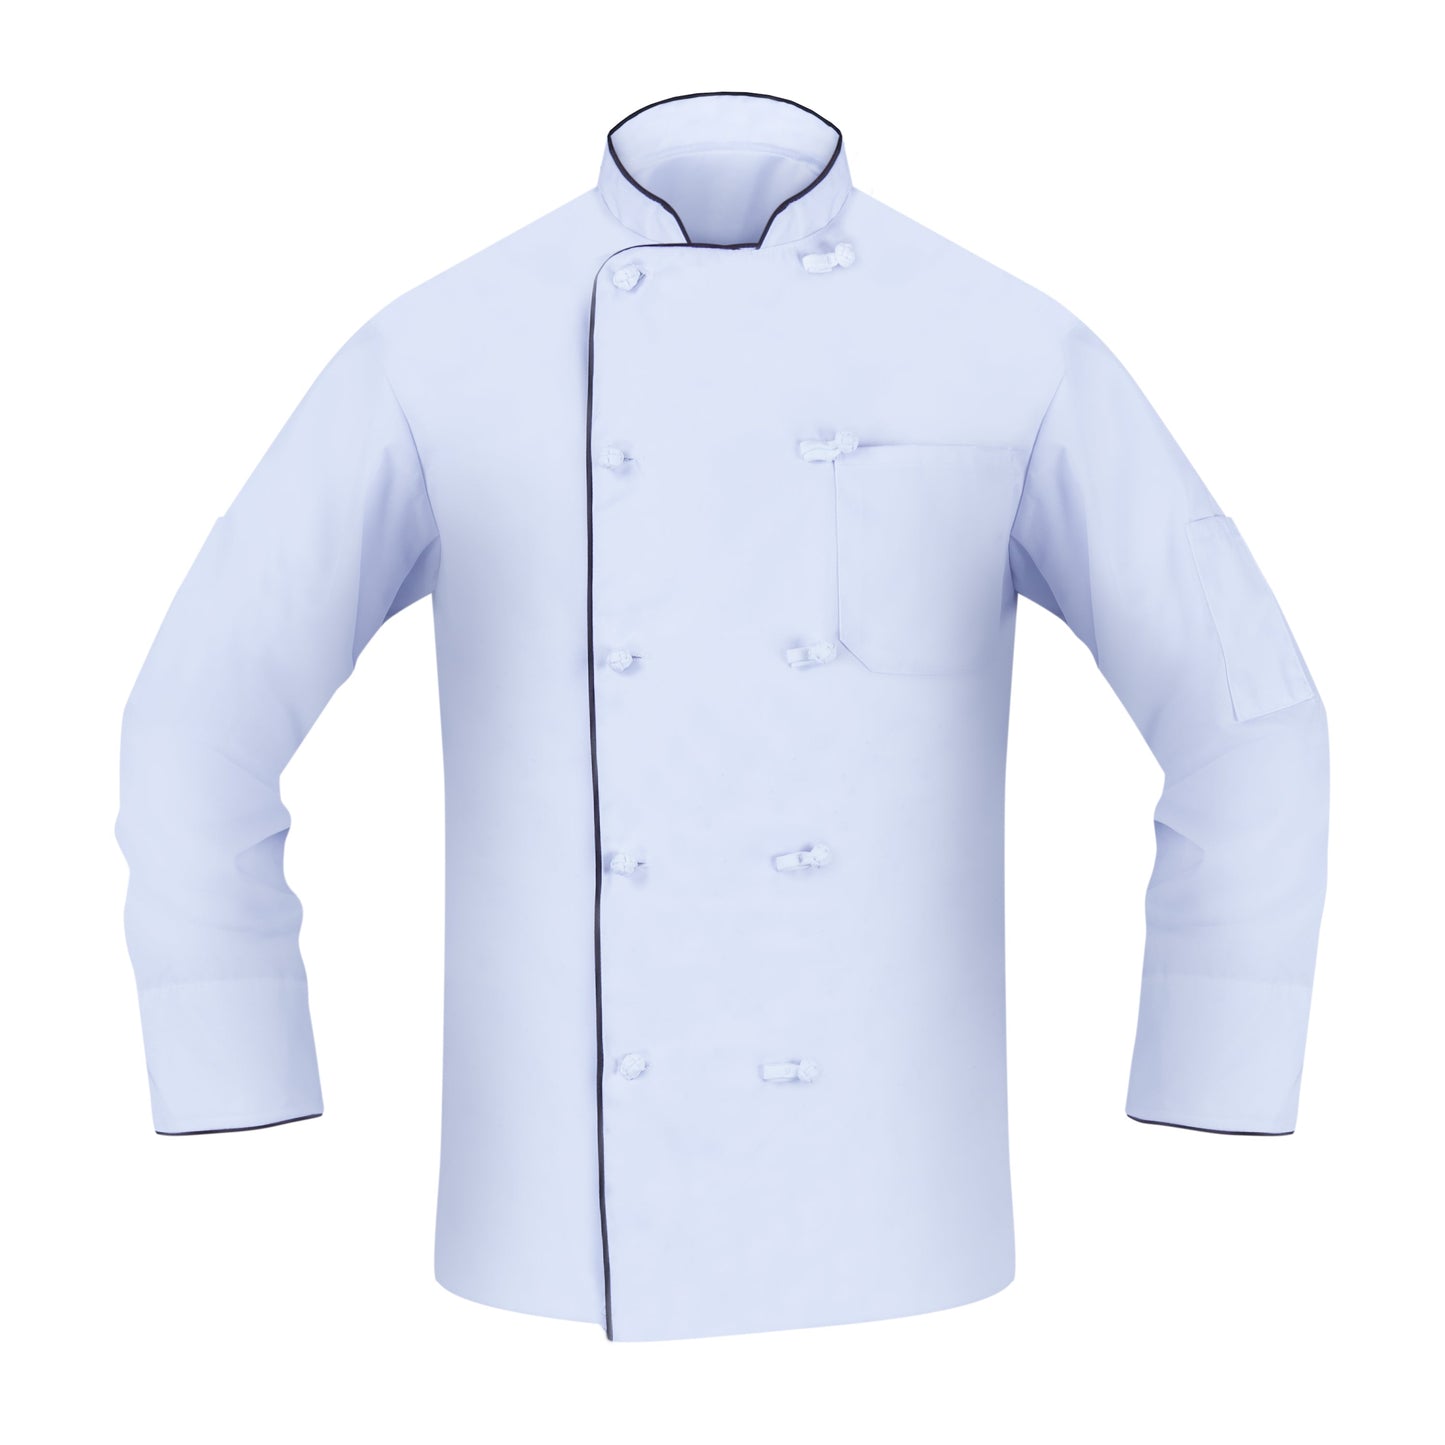 American Dawn | 2X-Large White Chef Coat With Knot Buttons, Long Sleeves And 2 Pockets